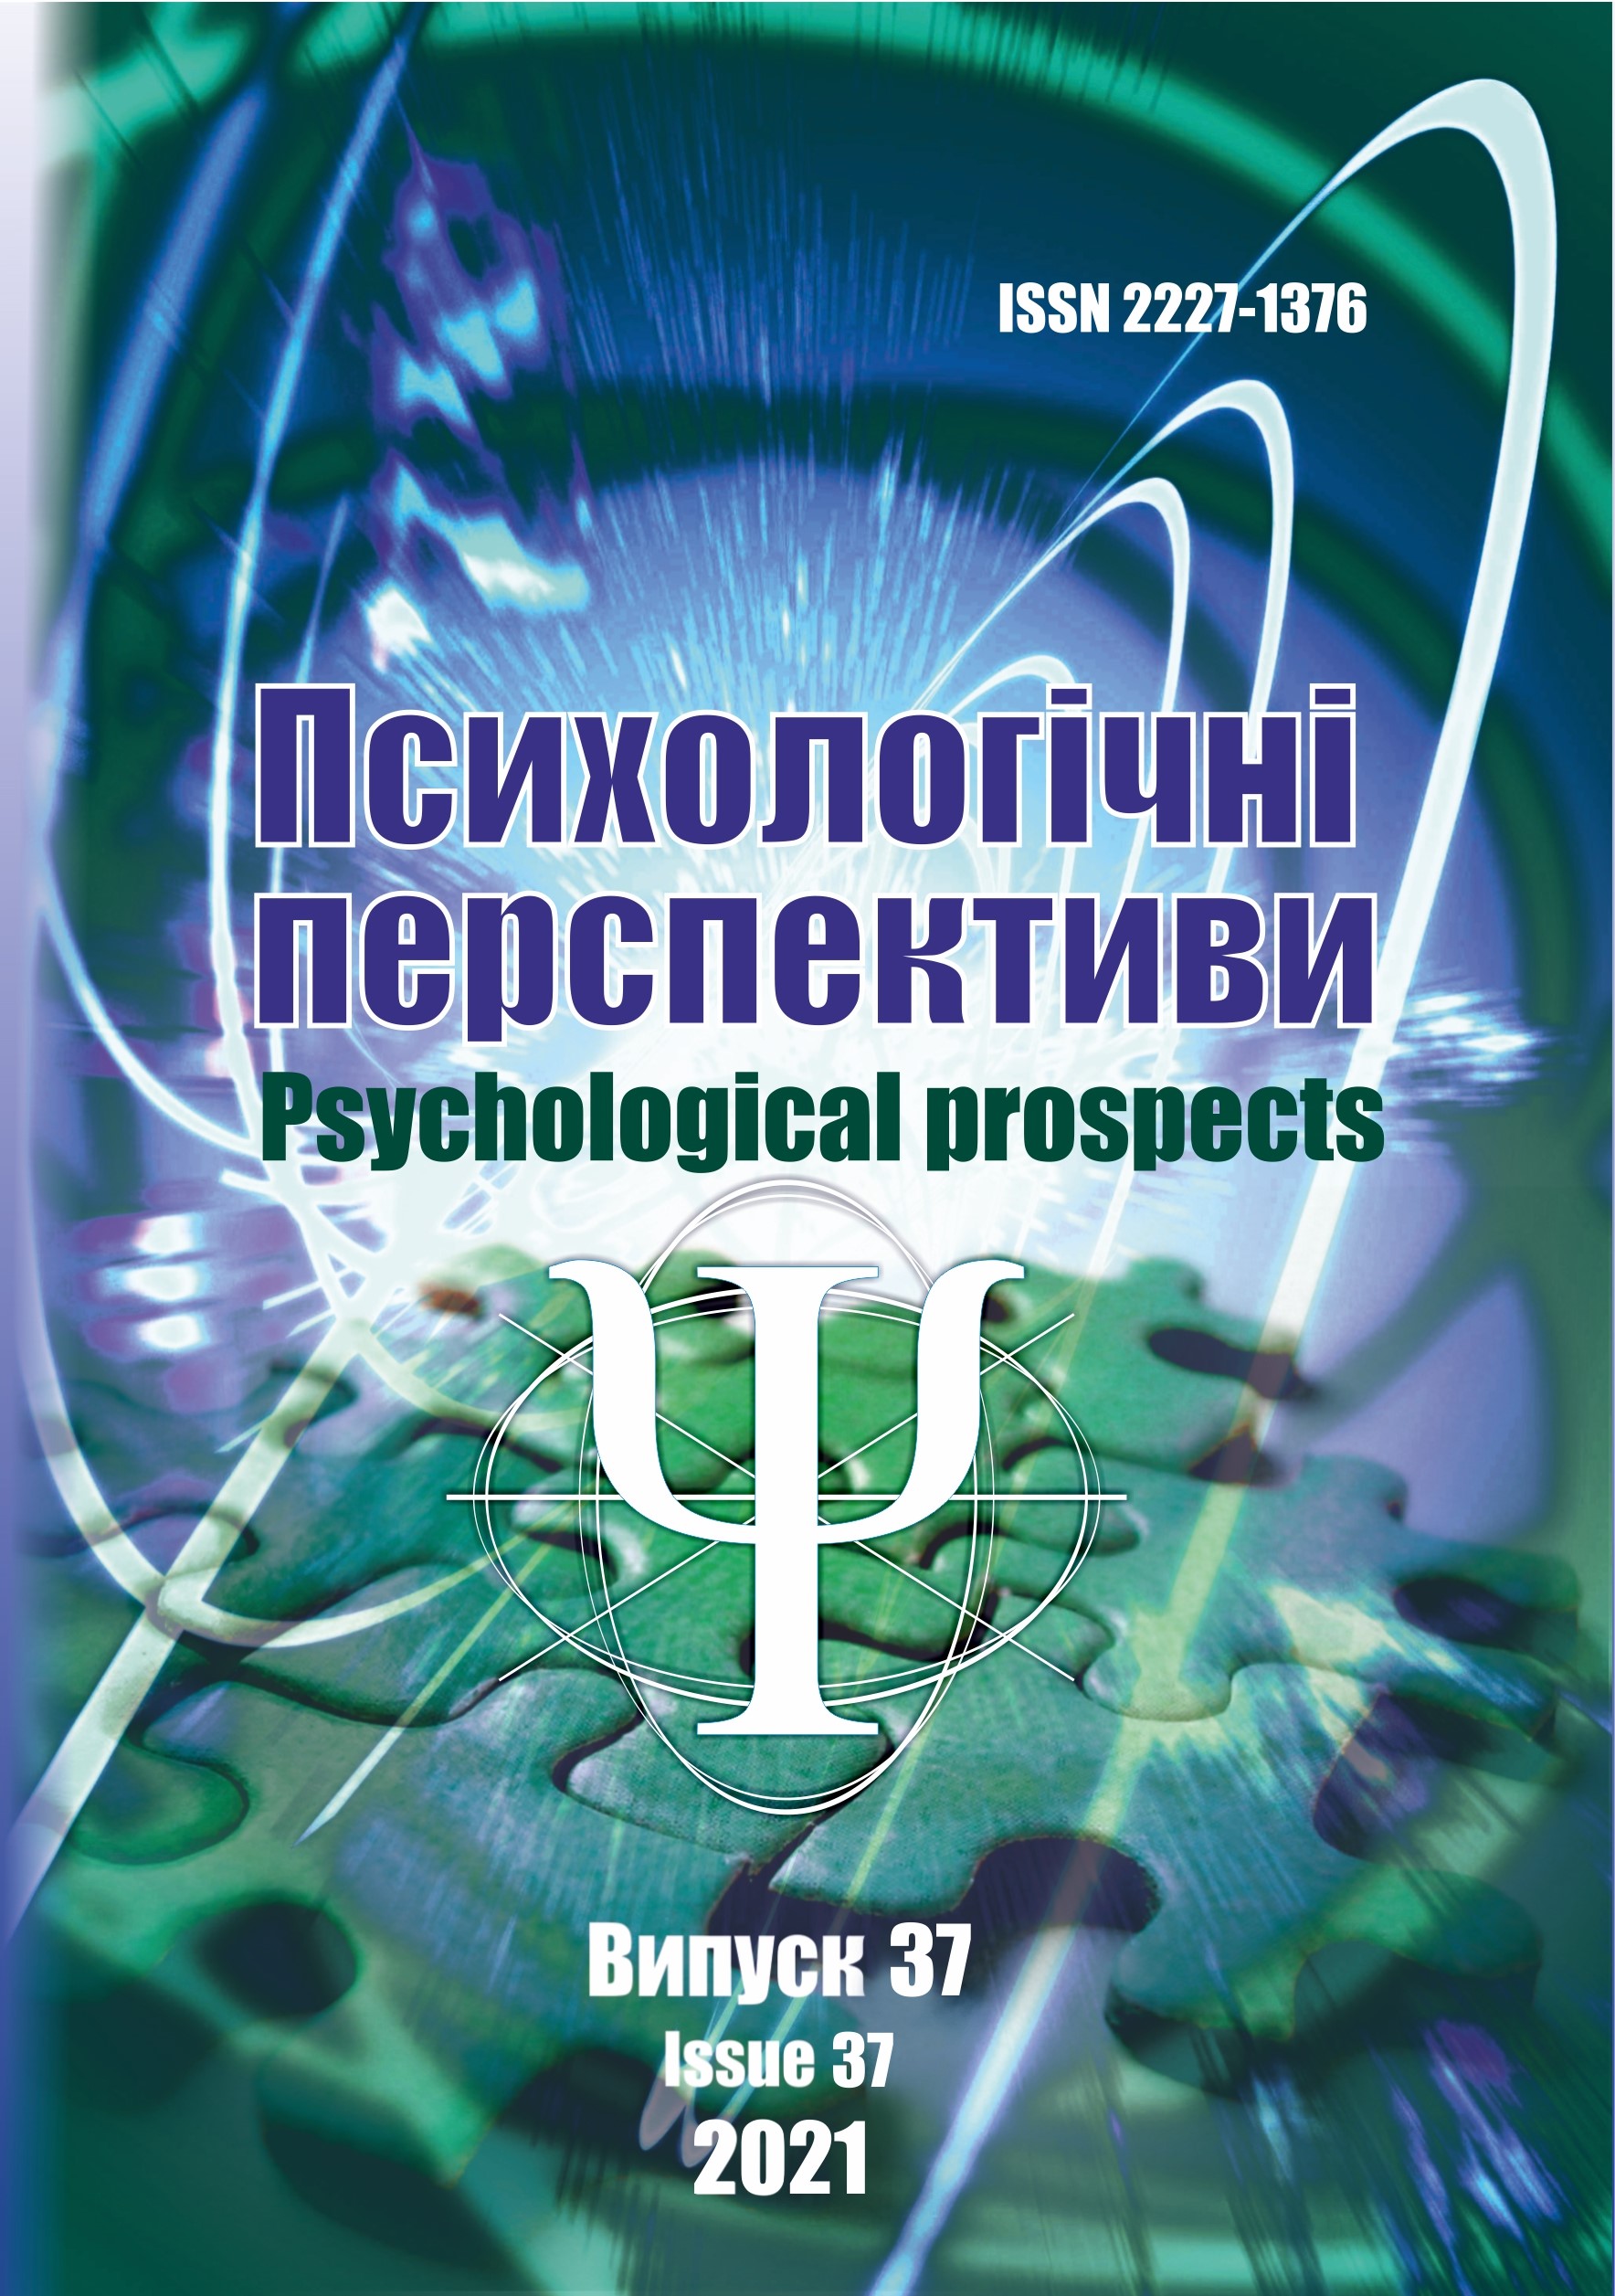 					View No. 37 (2021): Psychological Prospects Journal
				